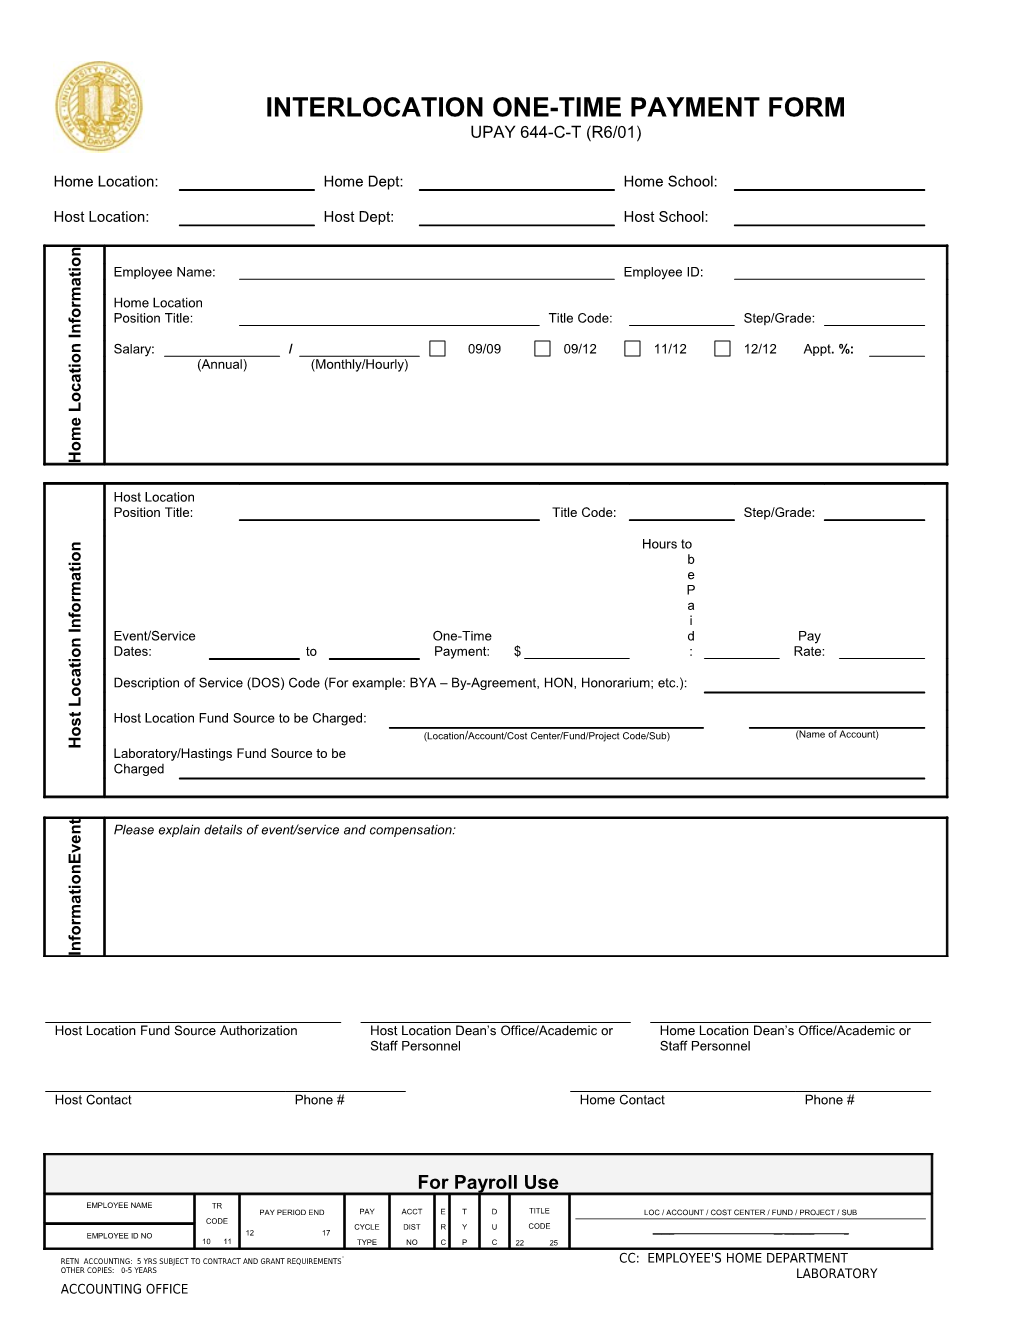 Interlocation One-Time Payment Form